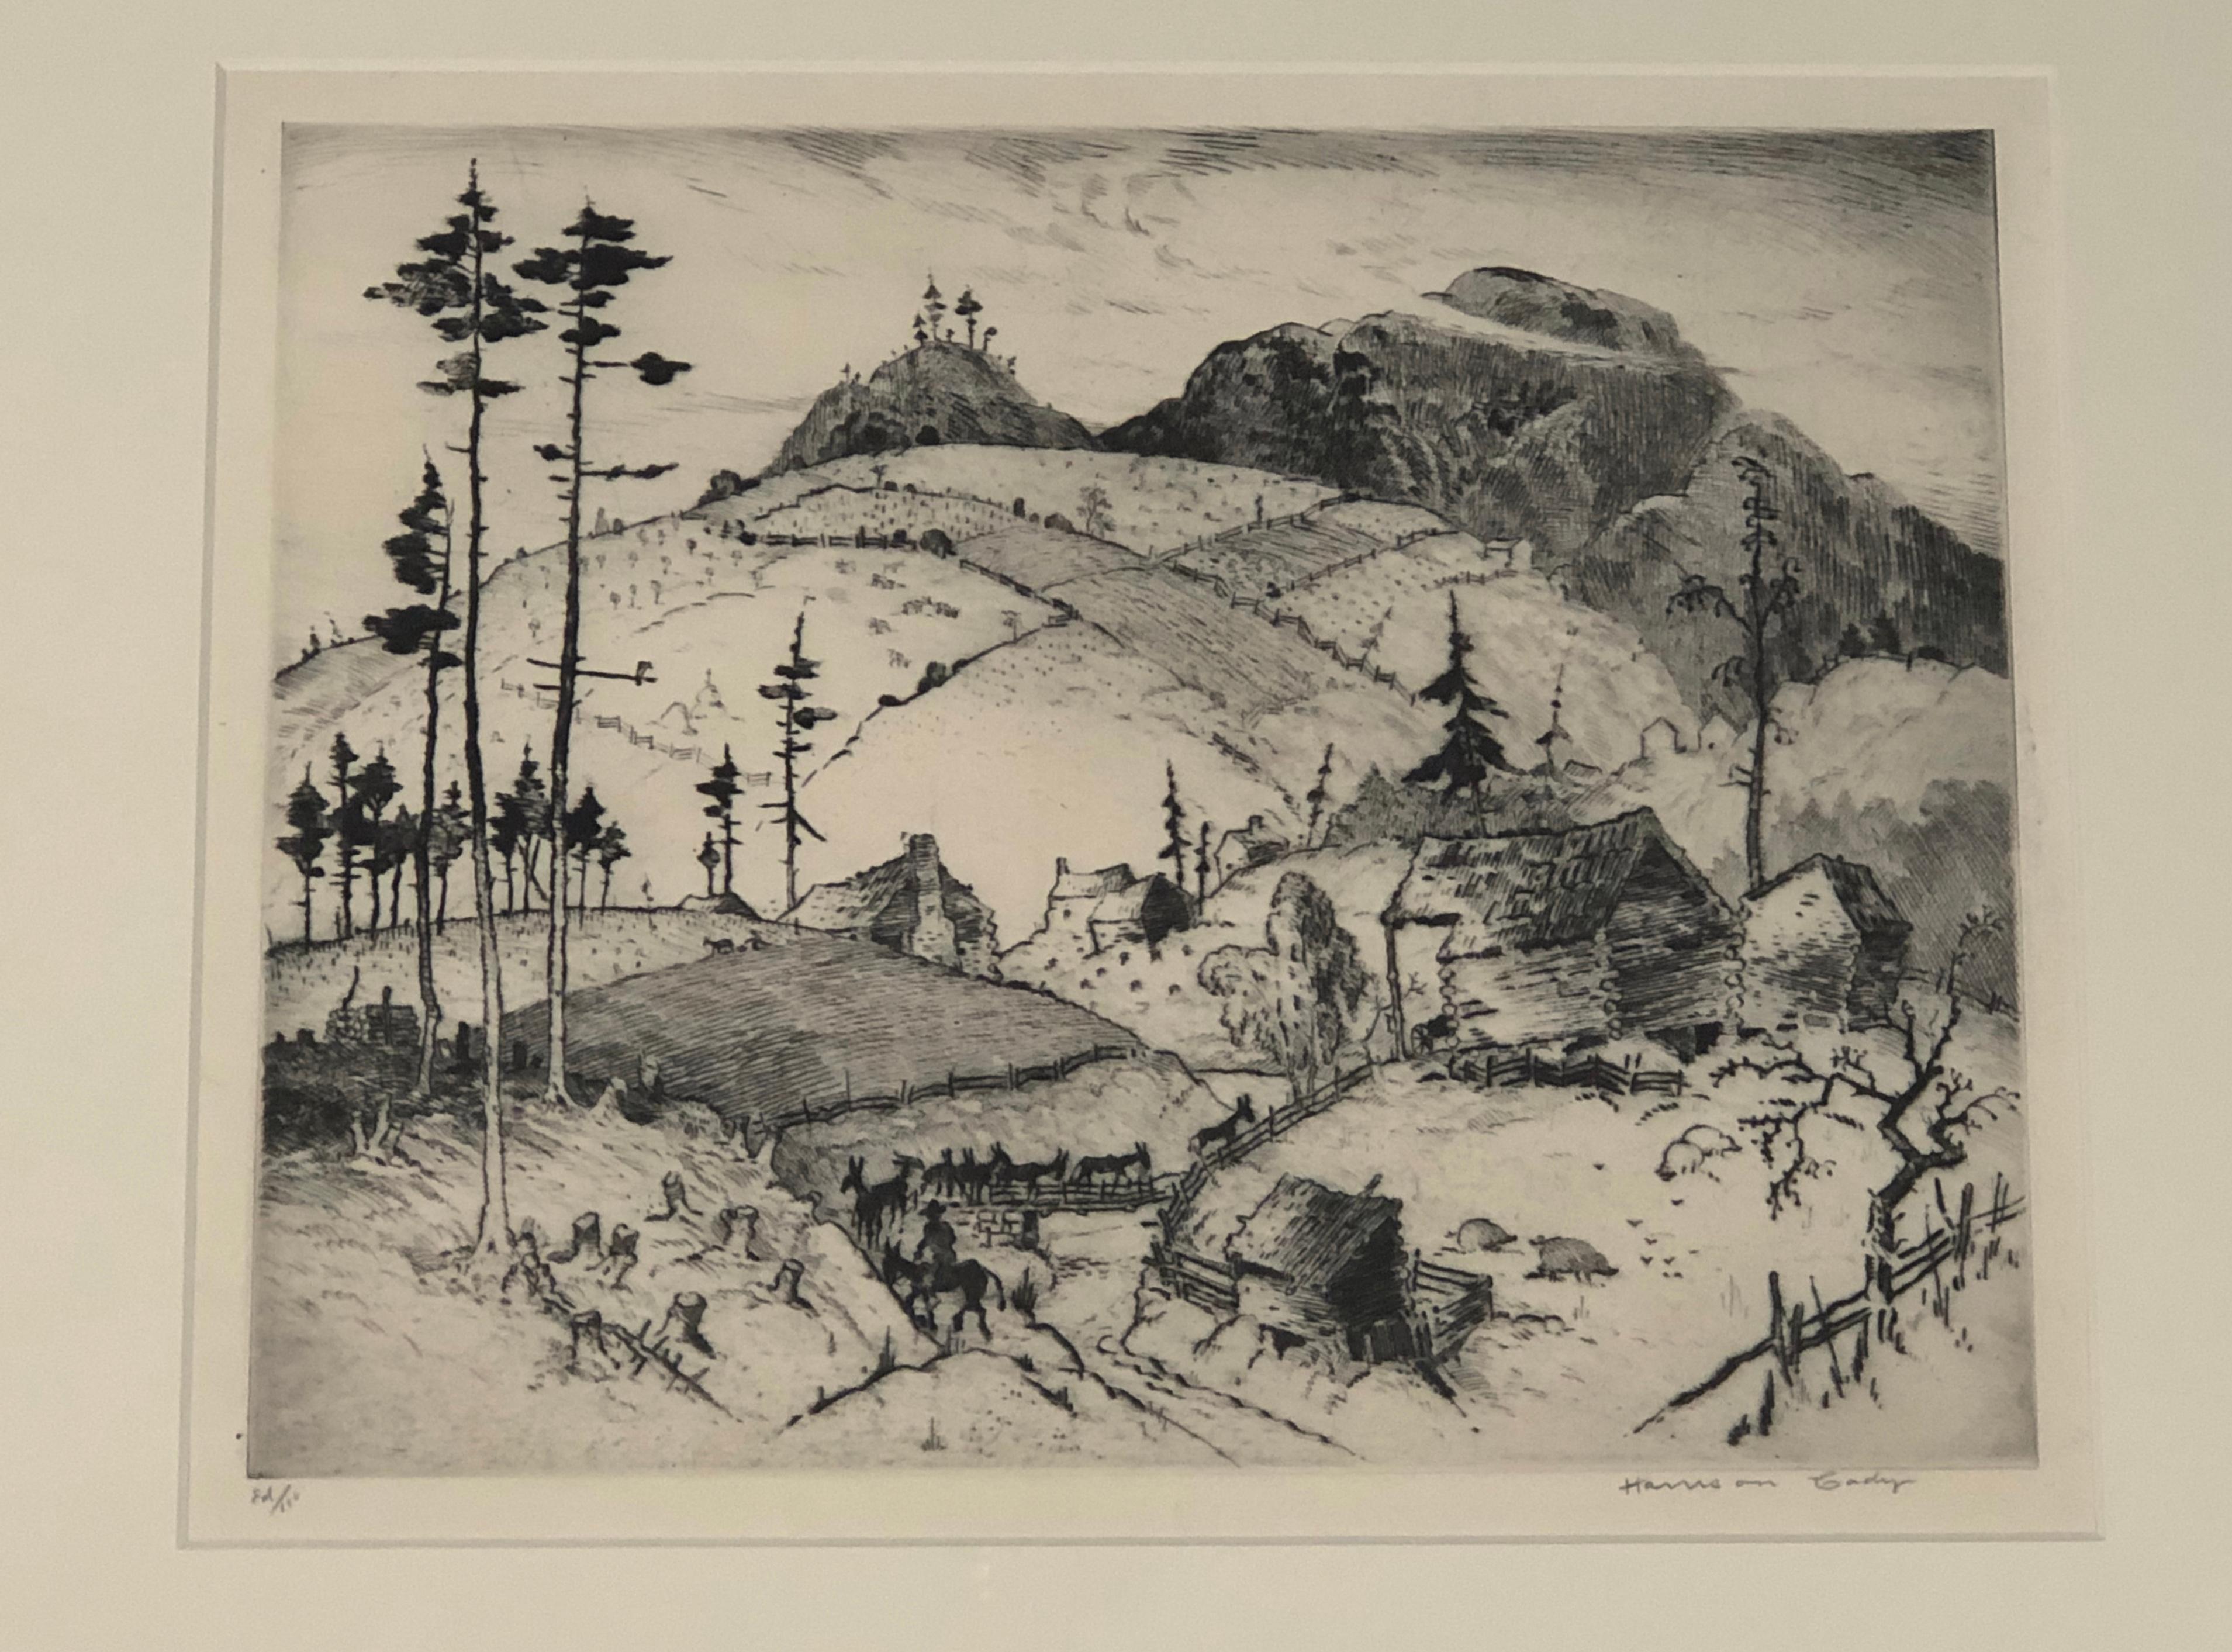 A framed etching by Harrison Cady (American, 1877-1970) of mountain farms near the village of Spruce Pine, North Carolina, depicting a farm with log cabin structures, a farmer, donkeys and split rail fencing on a mountain side. Signed lower right